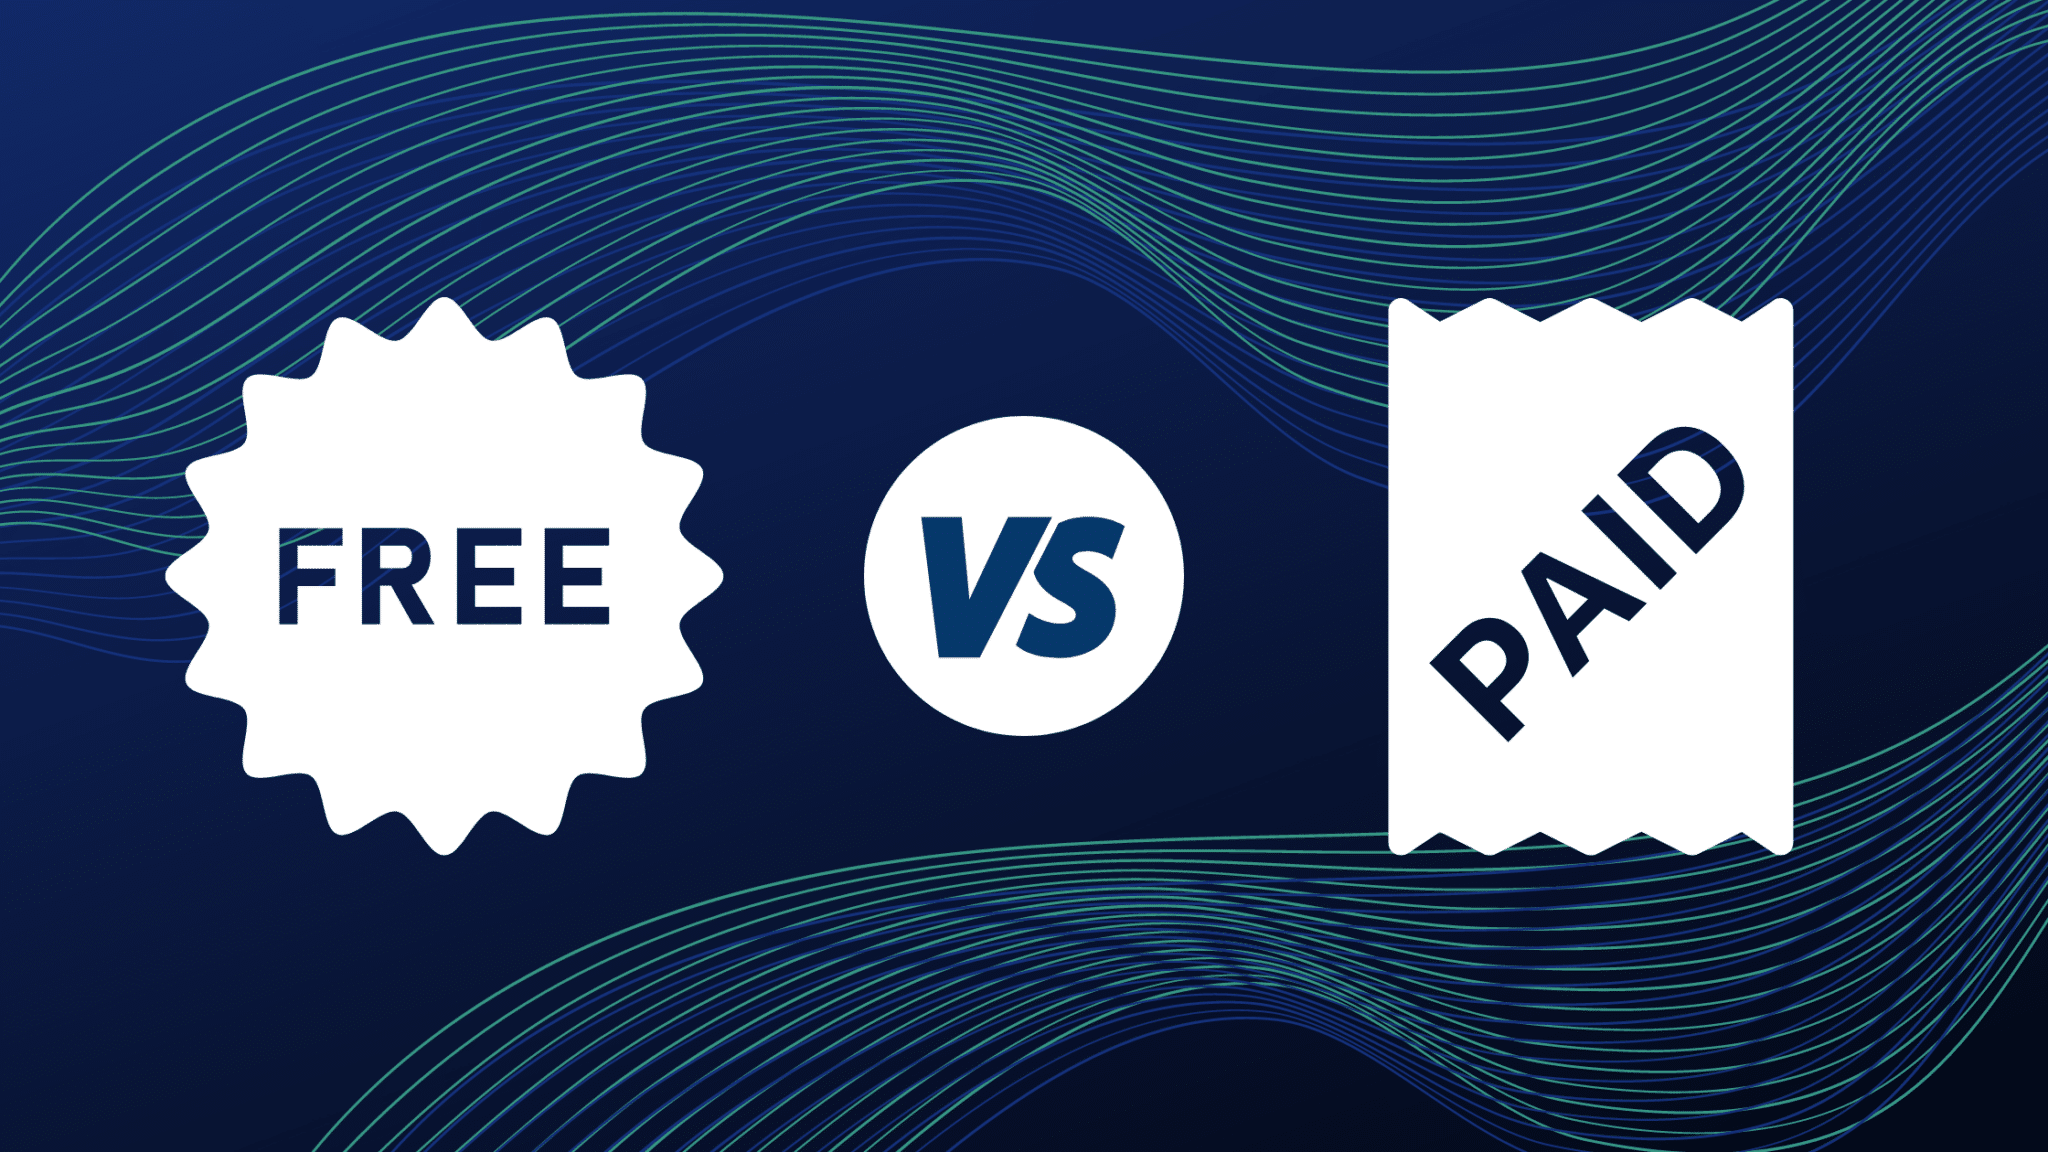 In this image, a comparison is being made between the benefits of using a free version of a product versus a paid version.